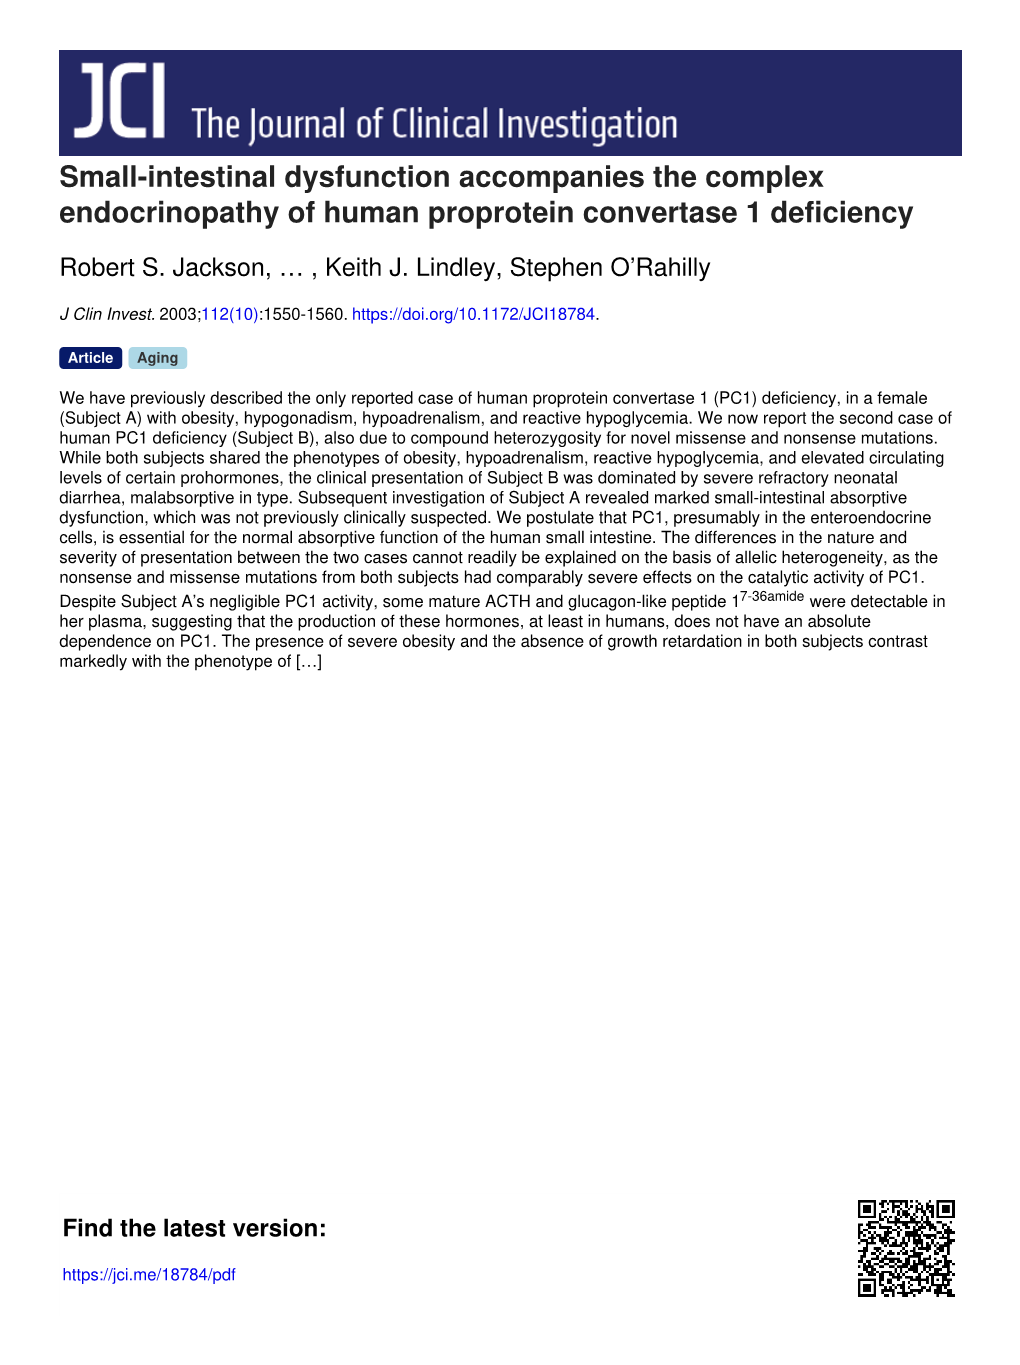 Small-Intestinal Dysfunction Accompanies the Complex Endocrinopathy of Human Proprotein Convertase 1 Deficiency